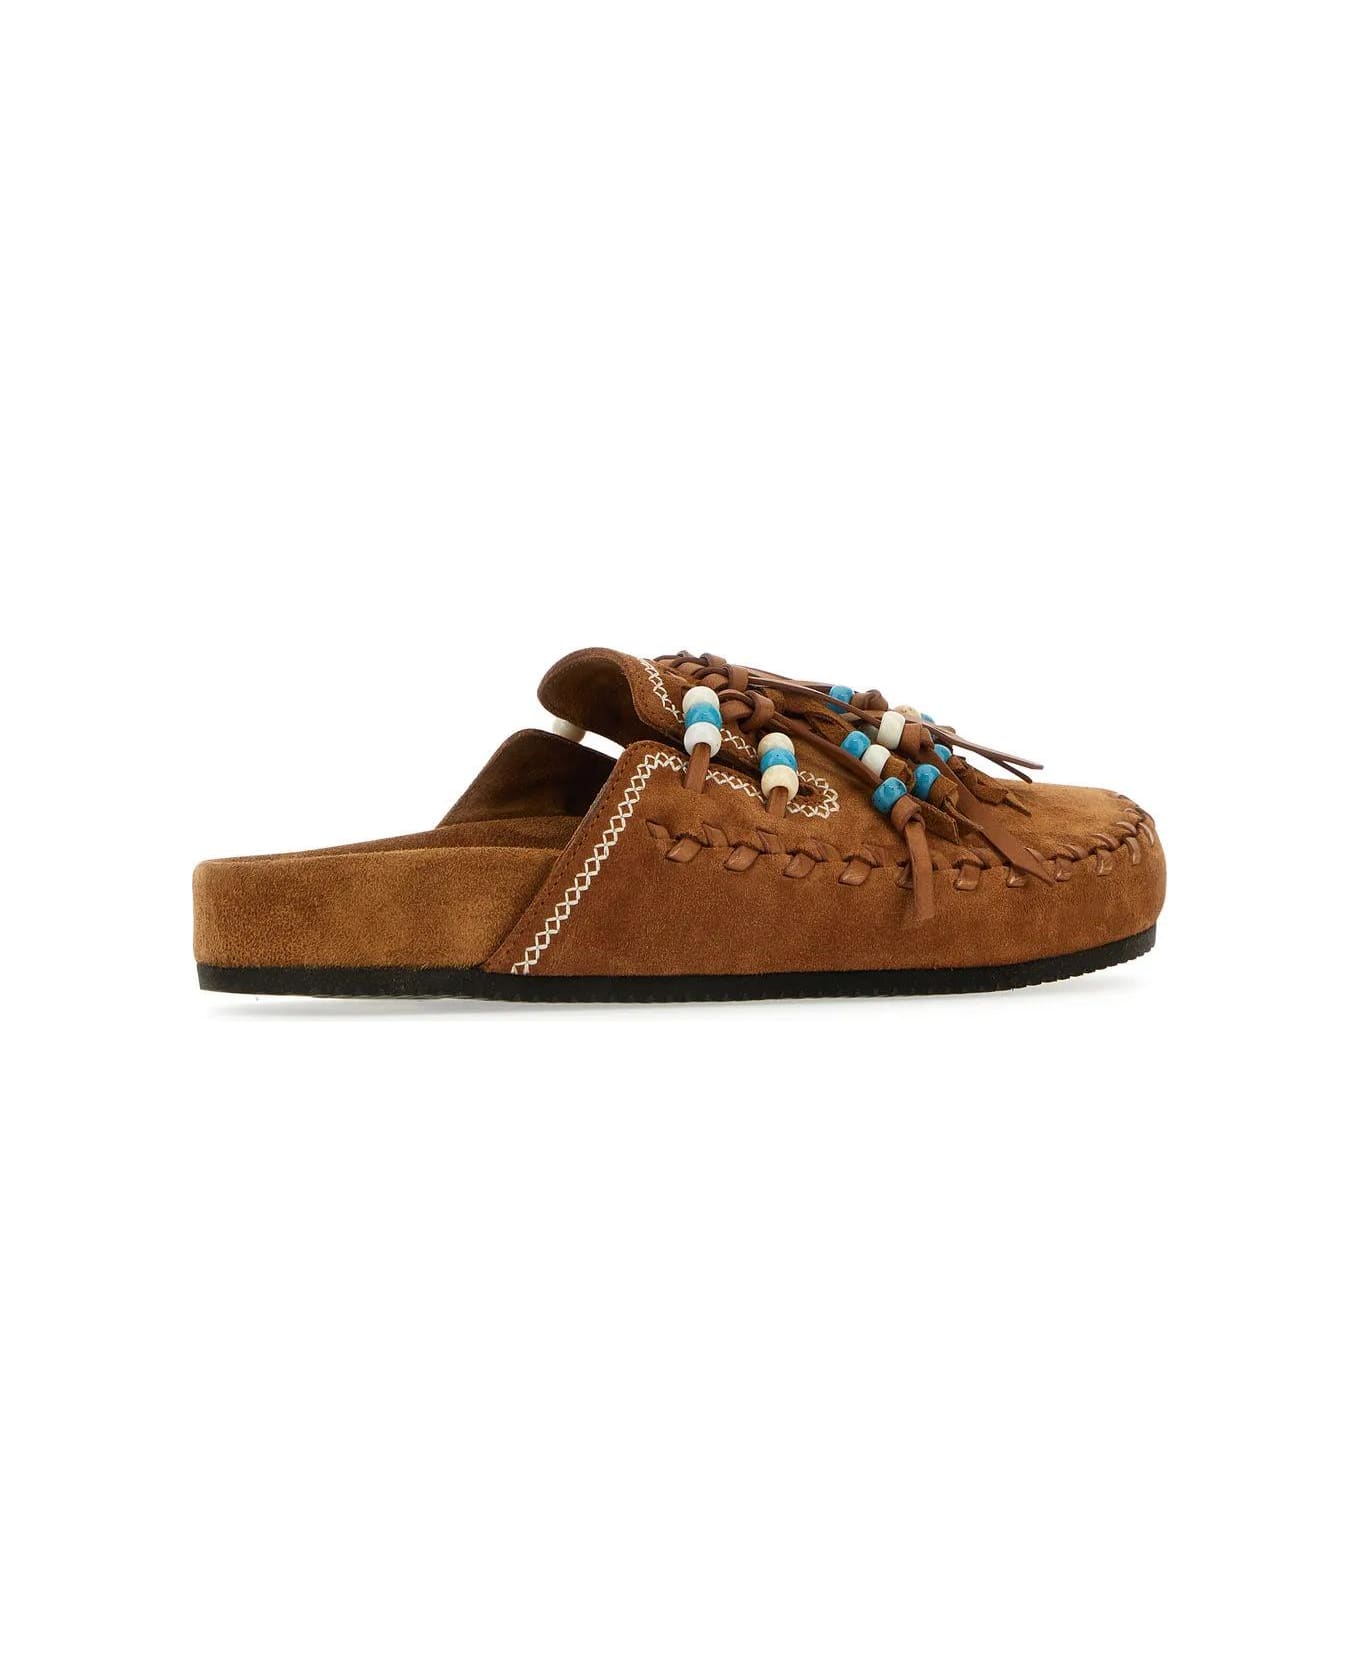 Alanui Camel Suede Leather Salvation Mountain Slippers - Brown